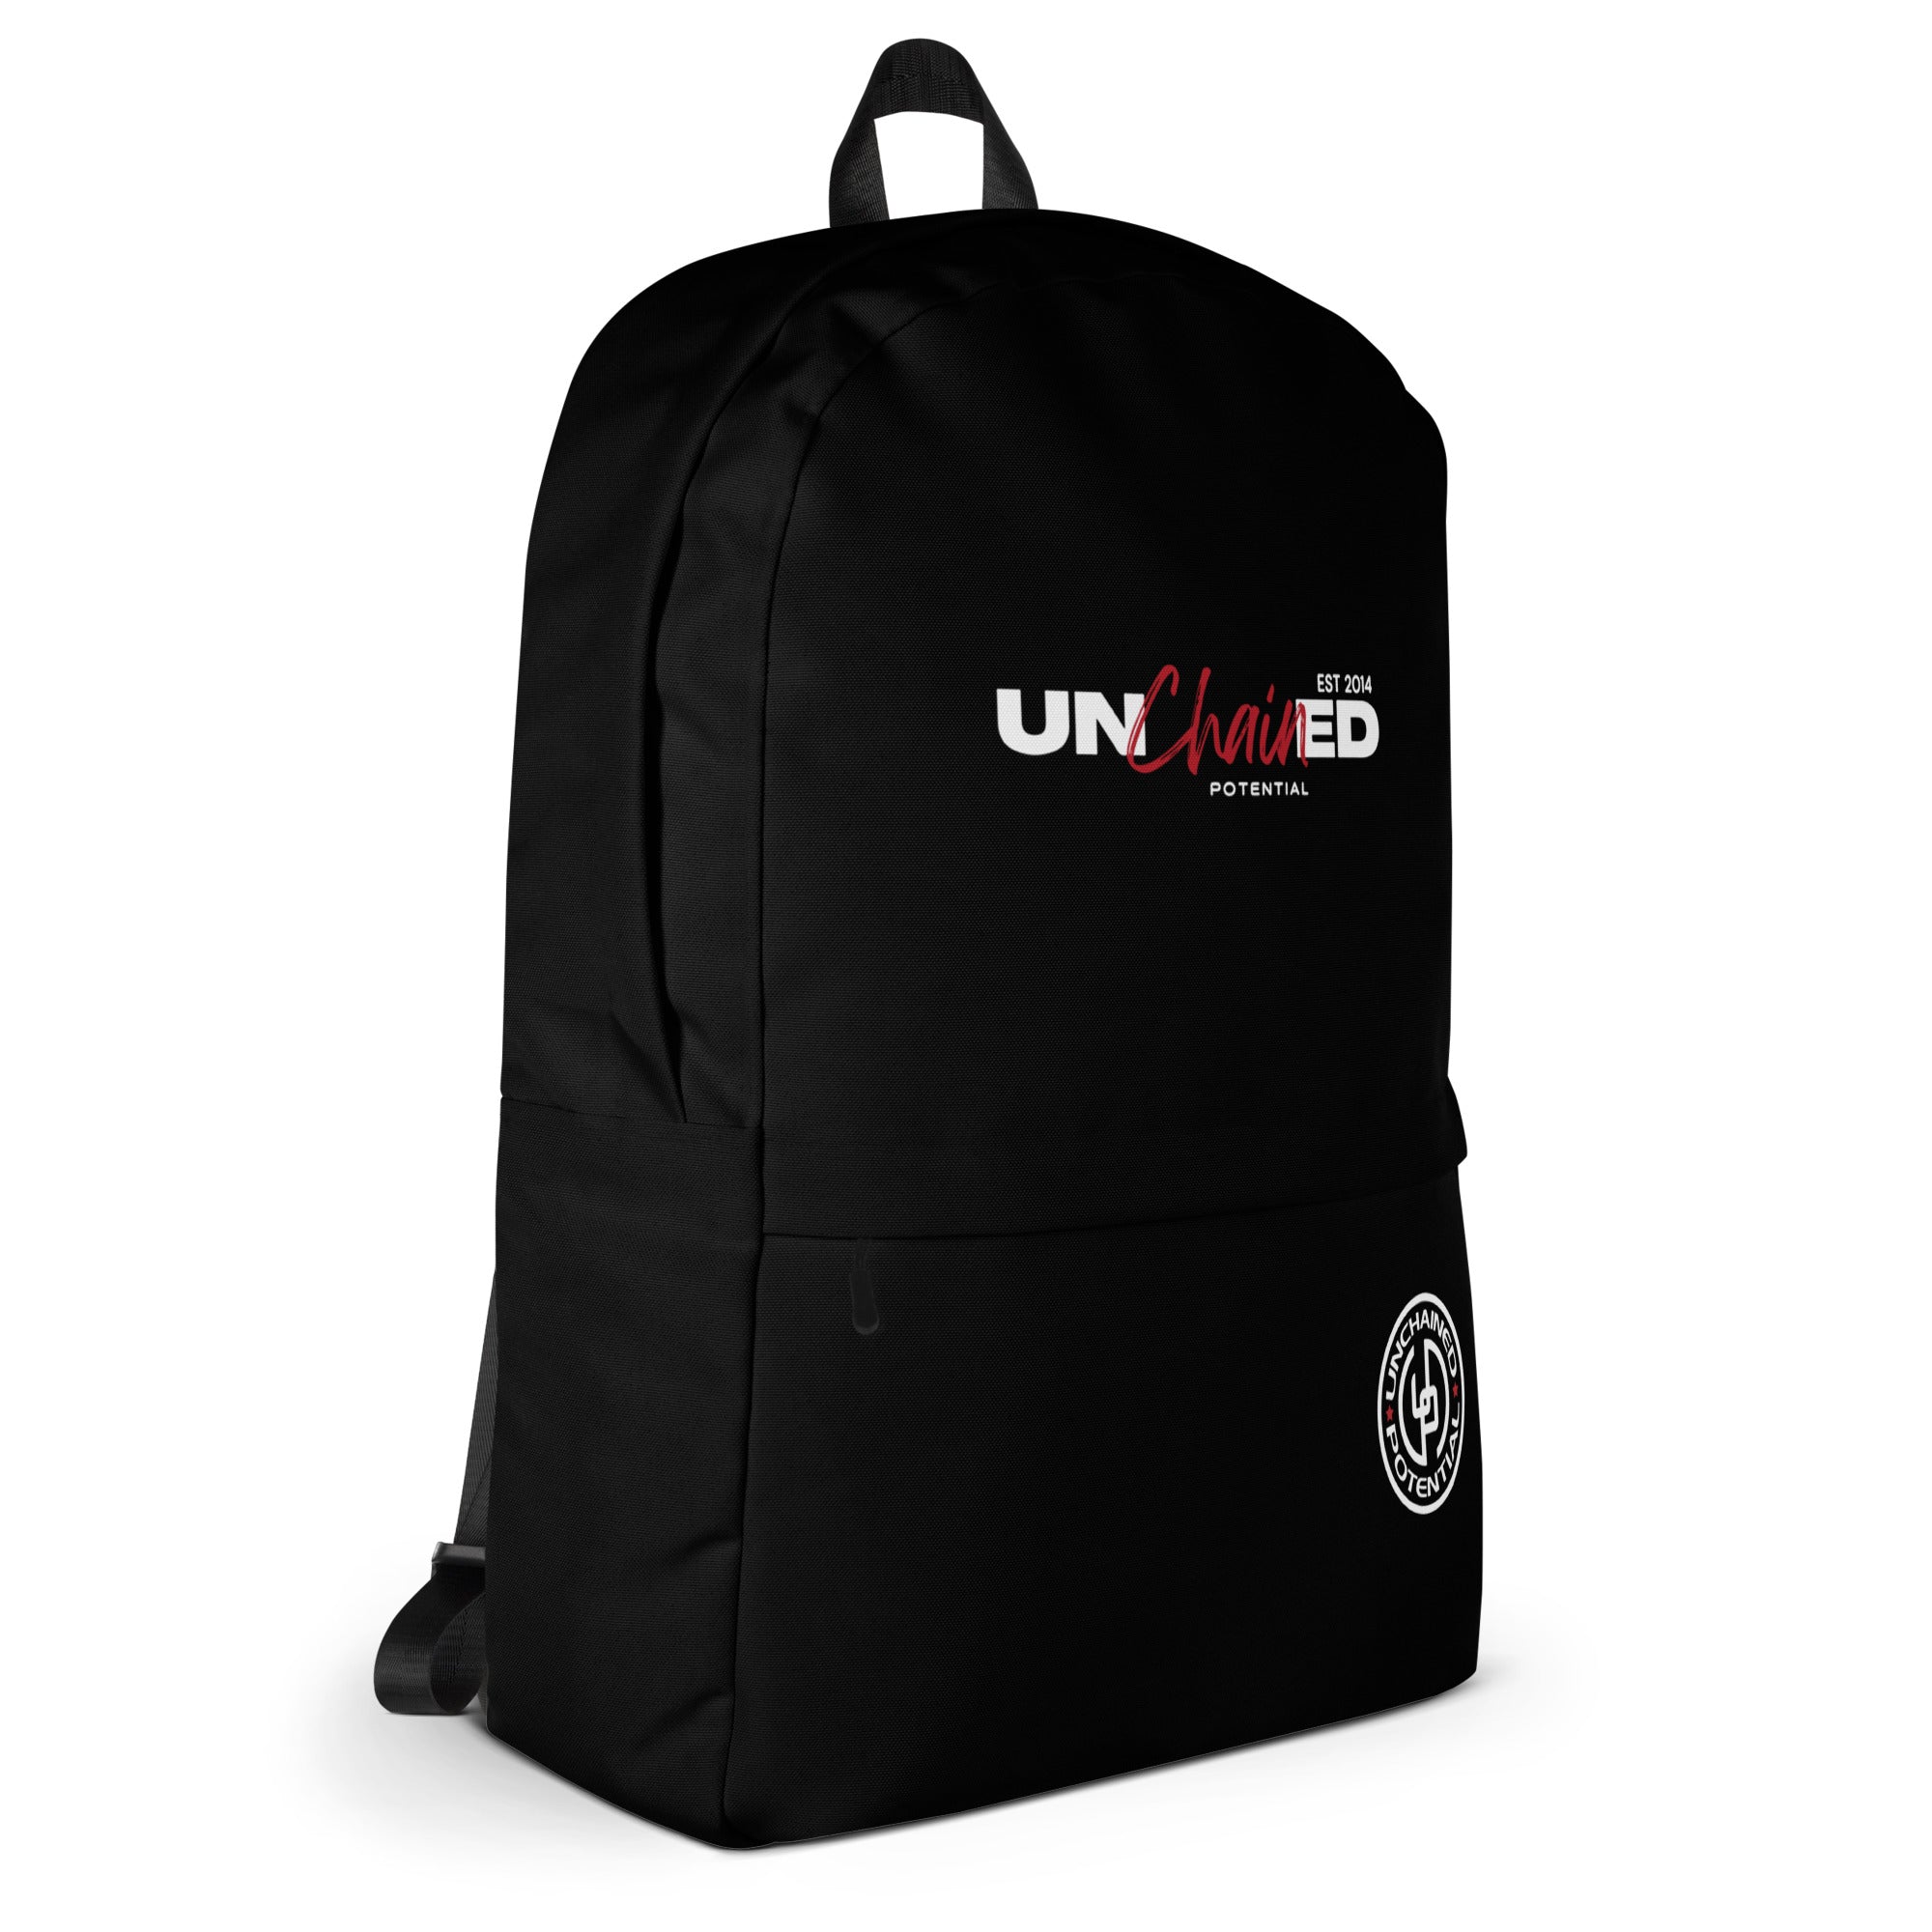 Unchained Potential Backpack